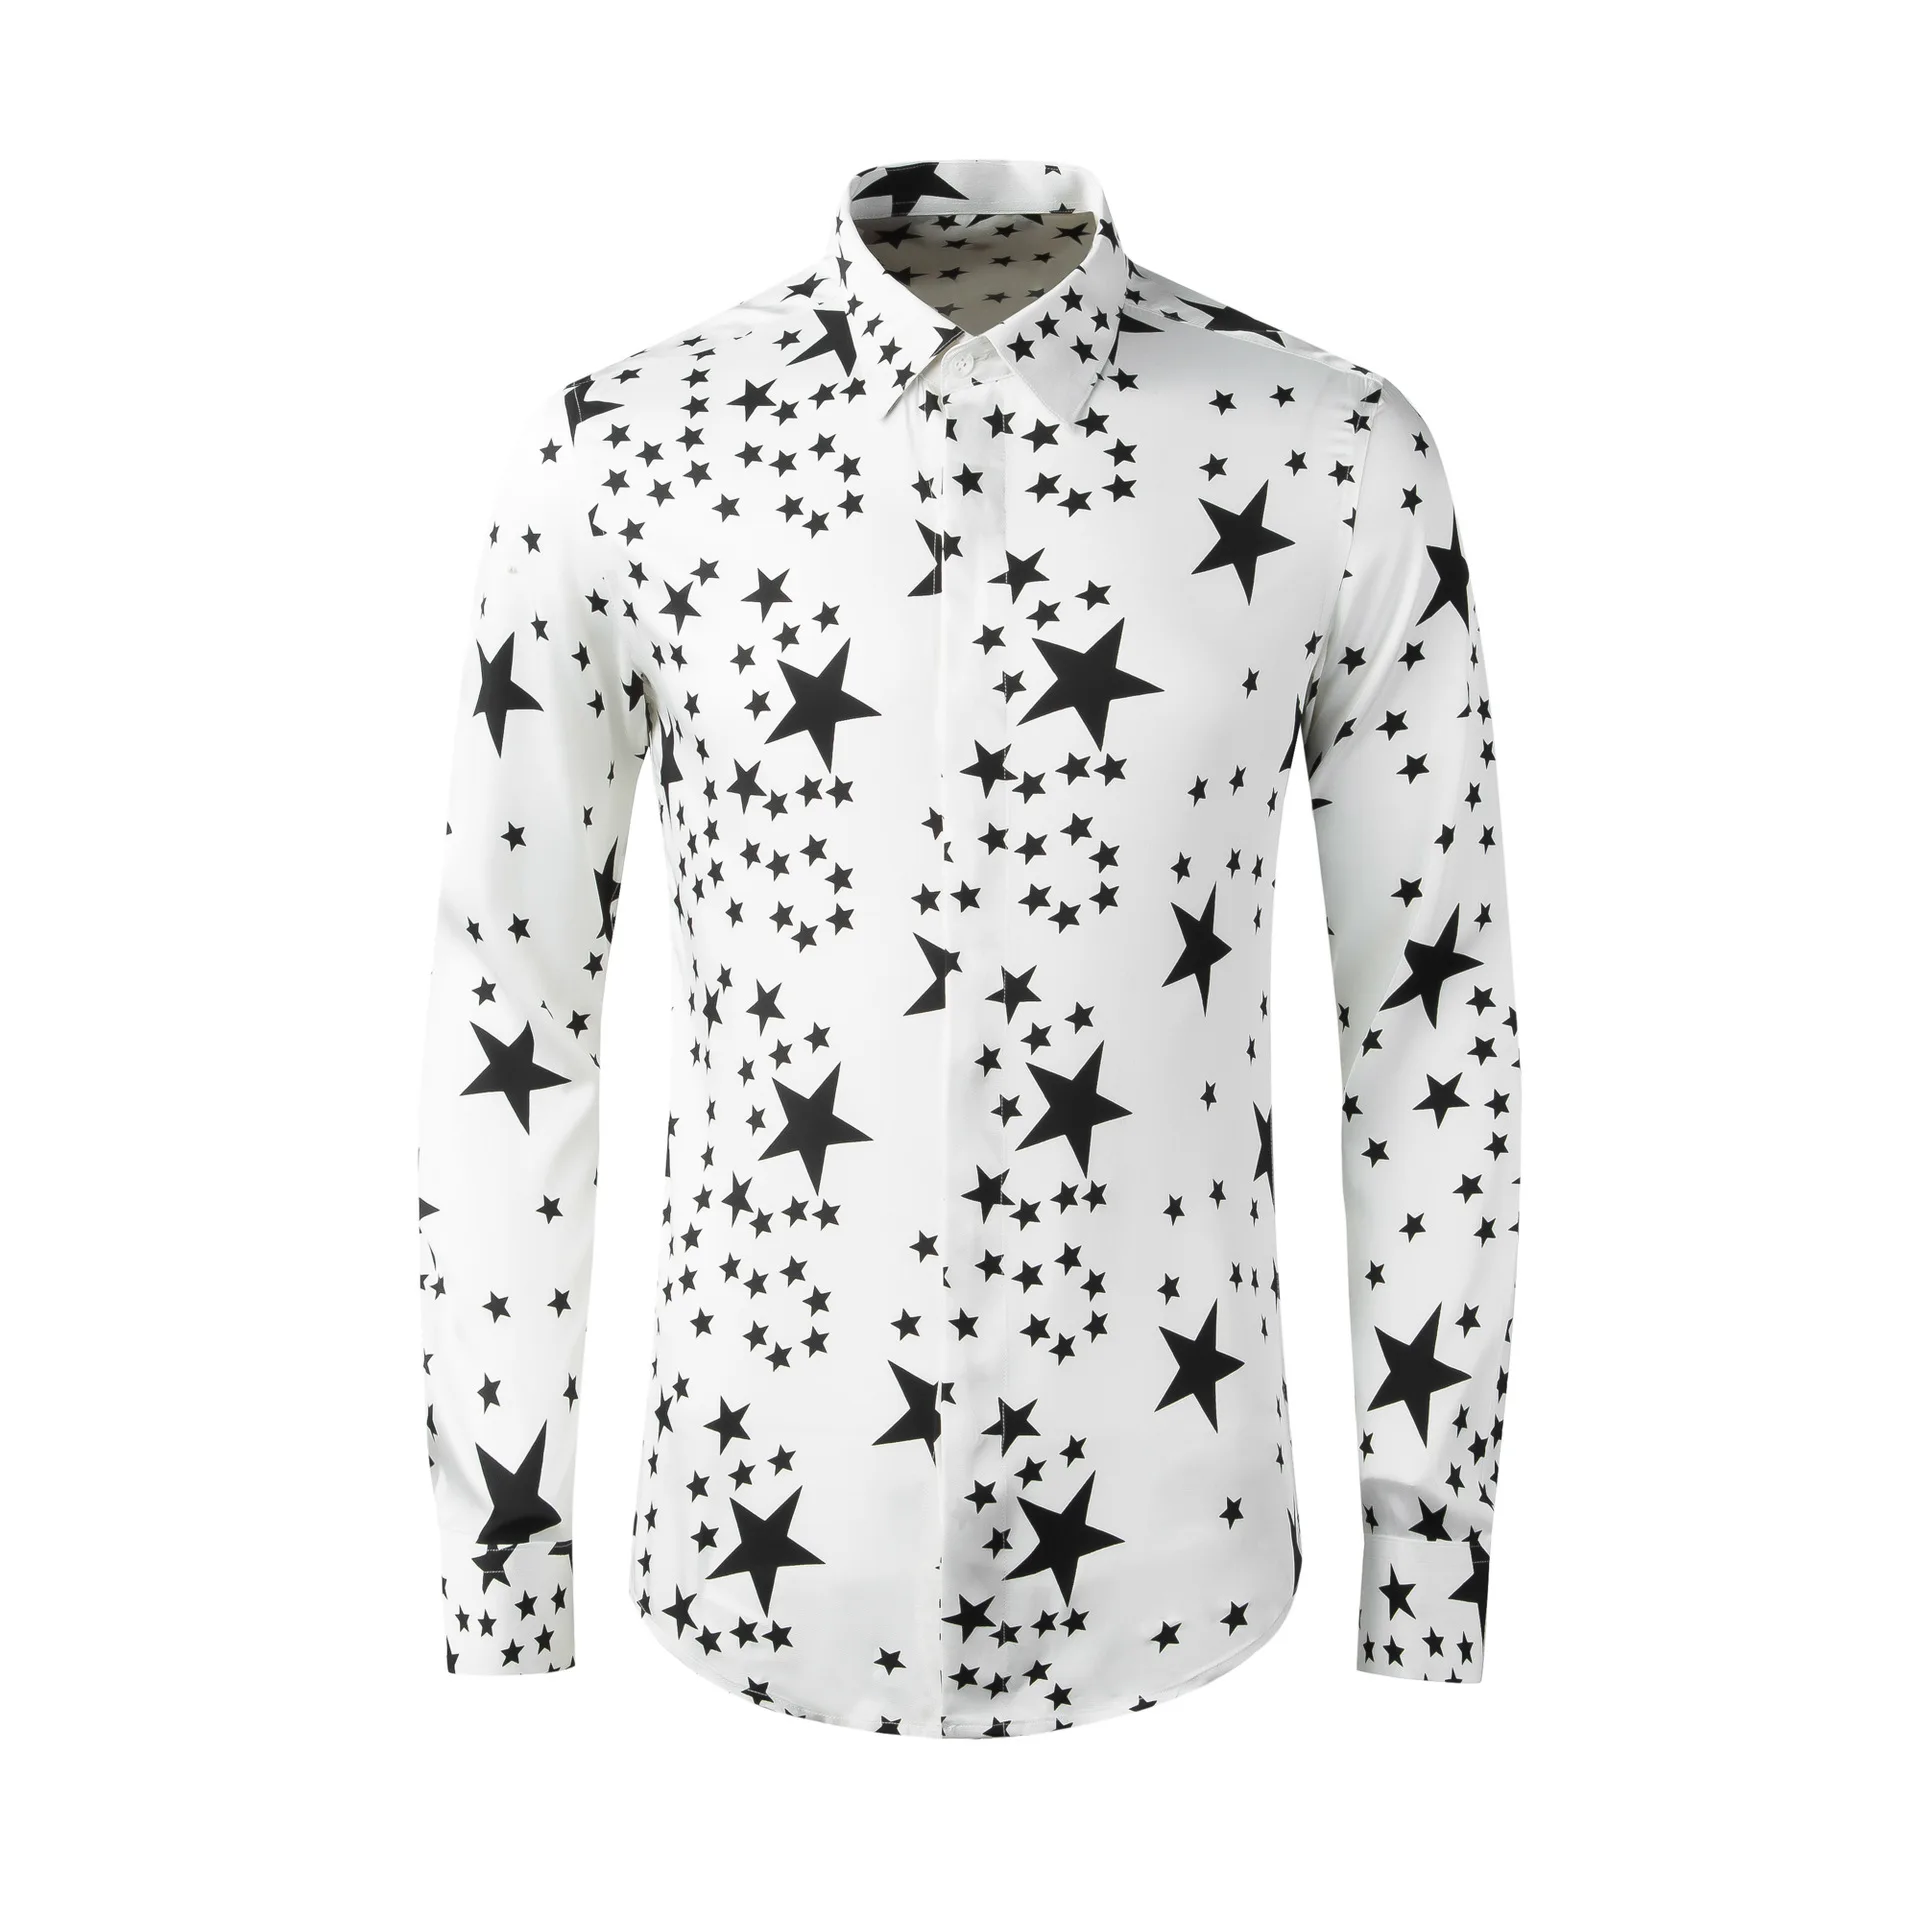 High Quality Luxury Jewelry Fashion Men'S Cotton Long Sleeve Printing Plain Stand Collar Casual Dress Shirts For Mengood